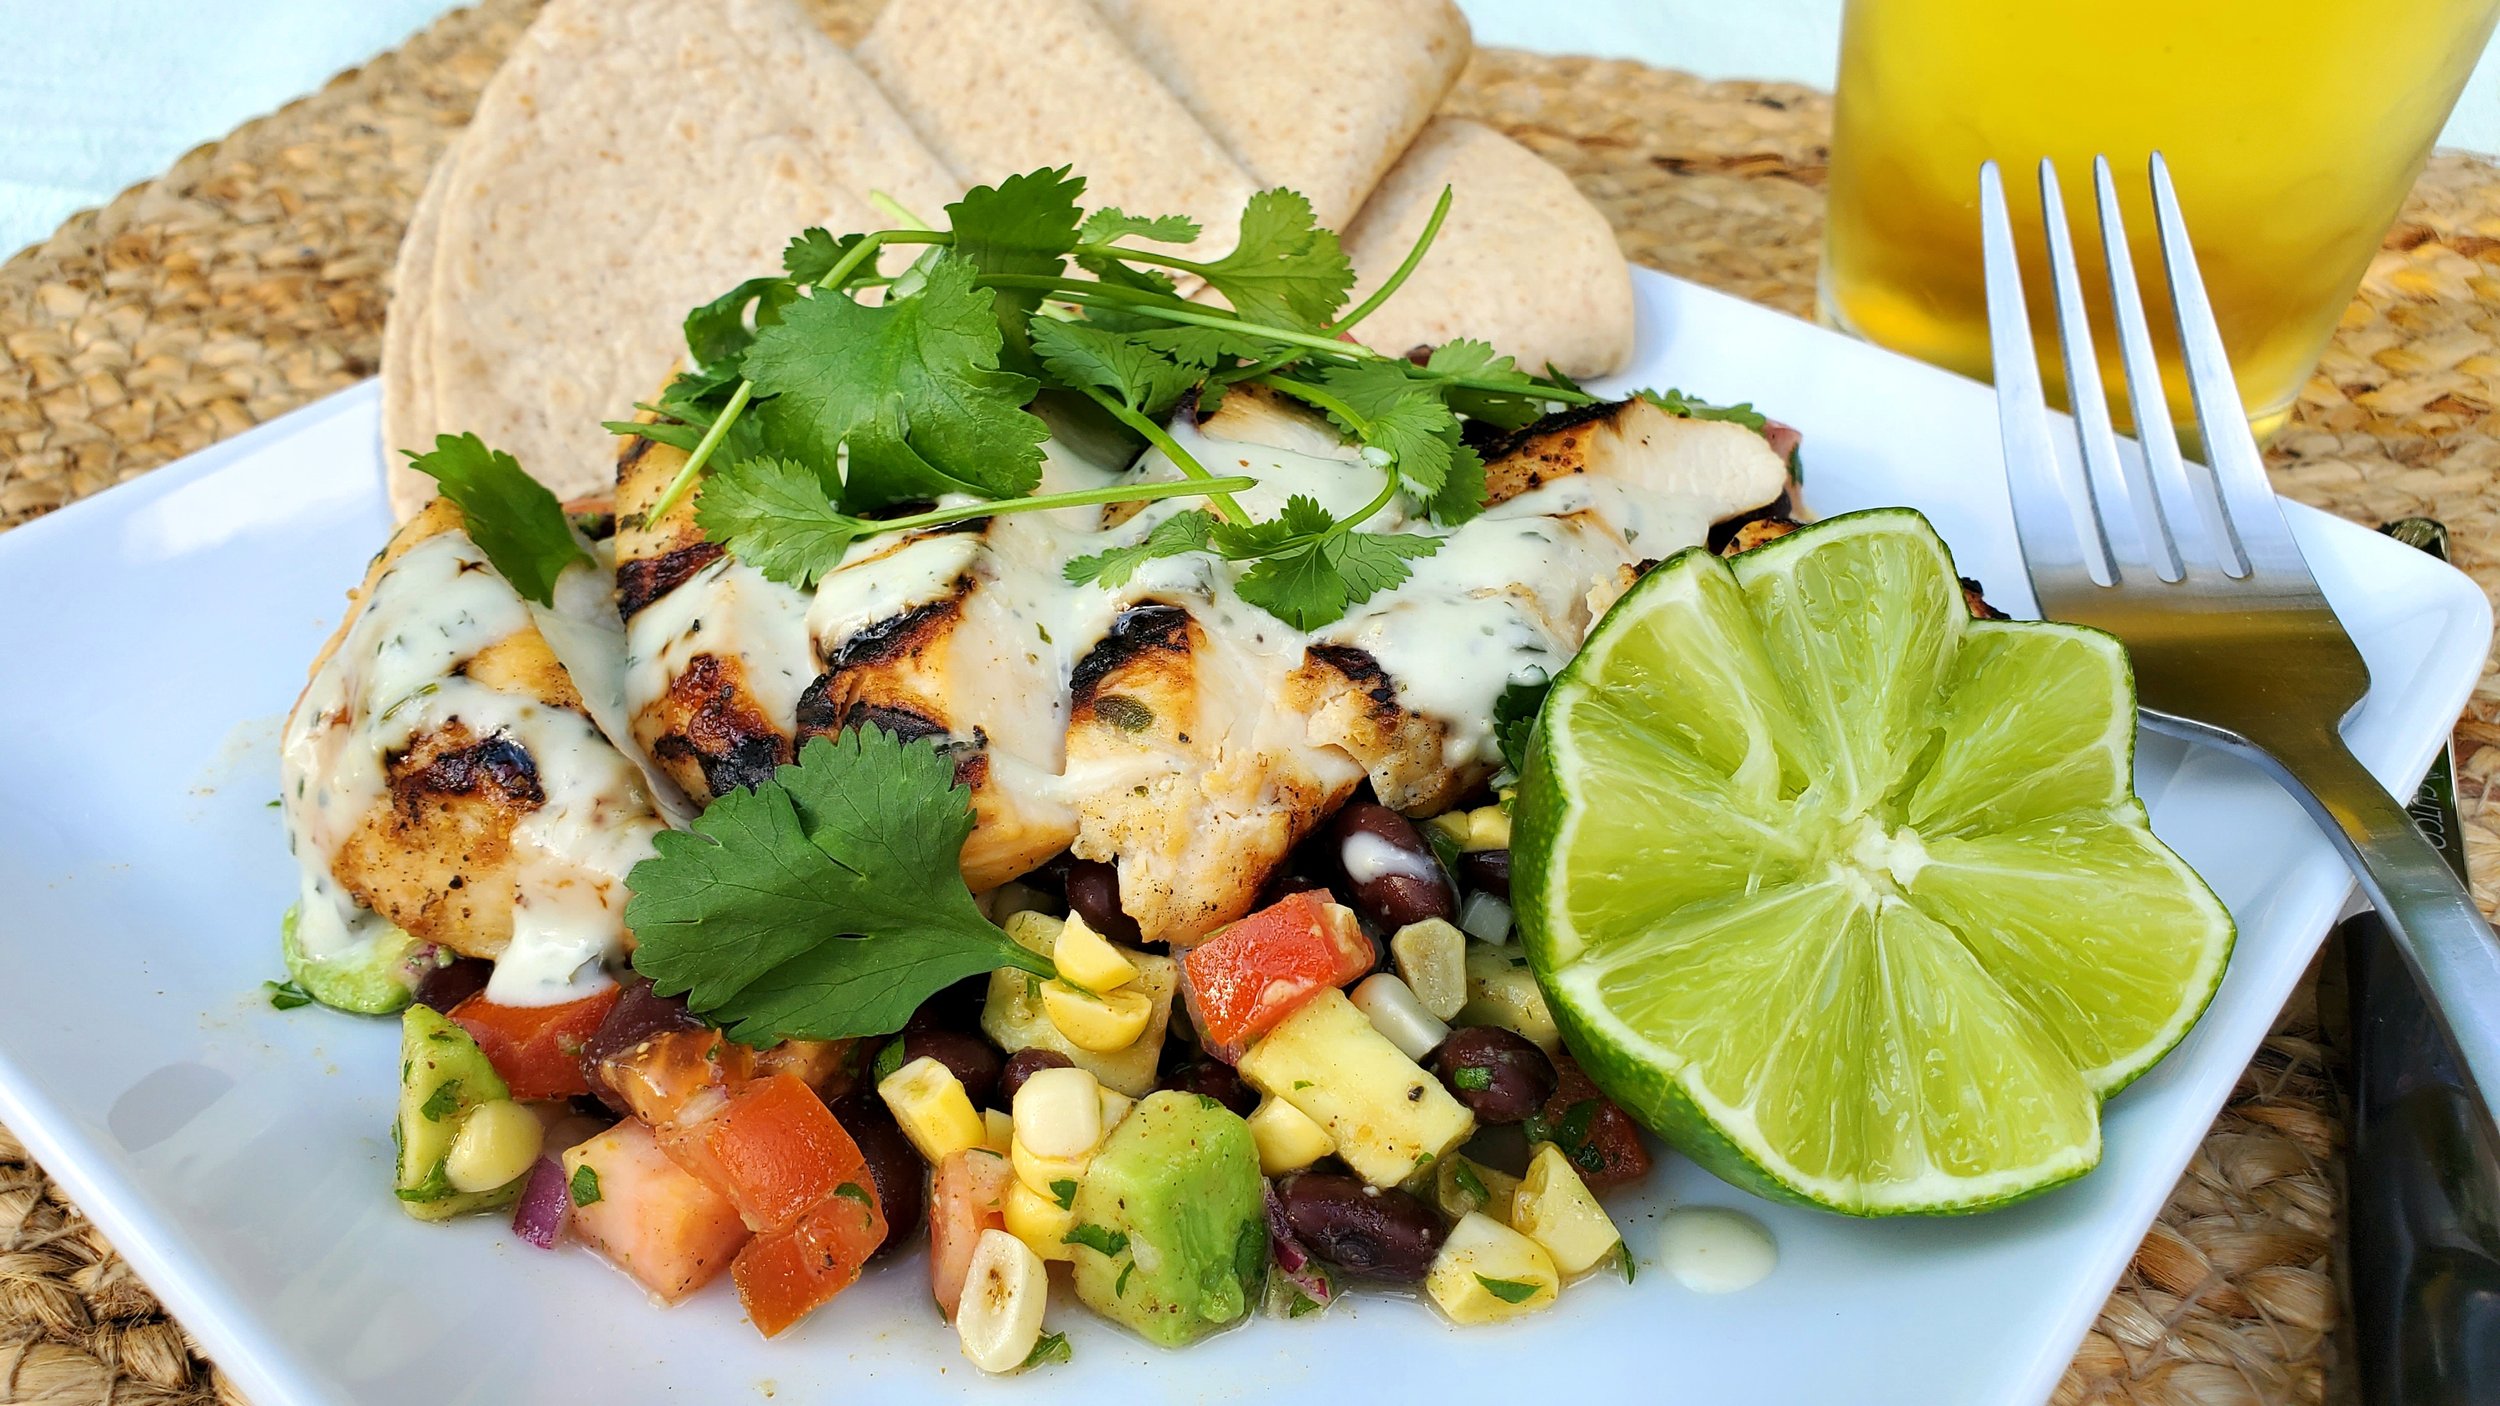 Grilled Tequila Lime Chicken